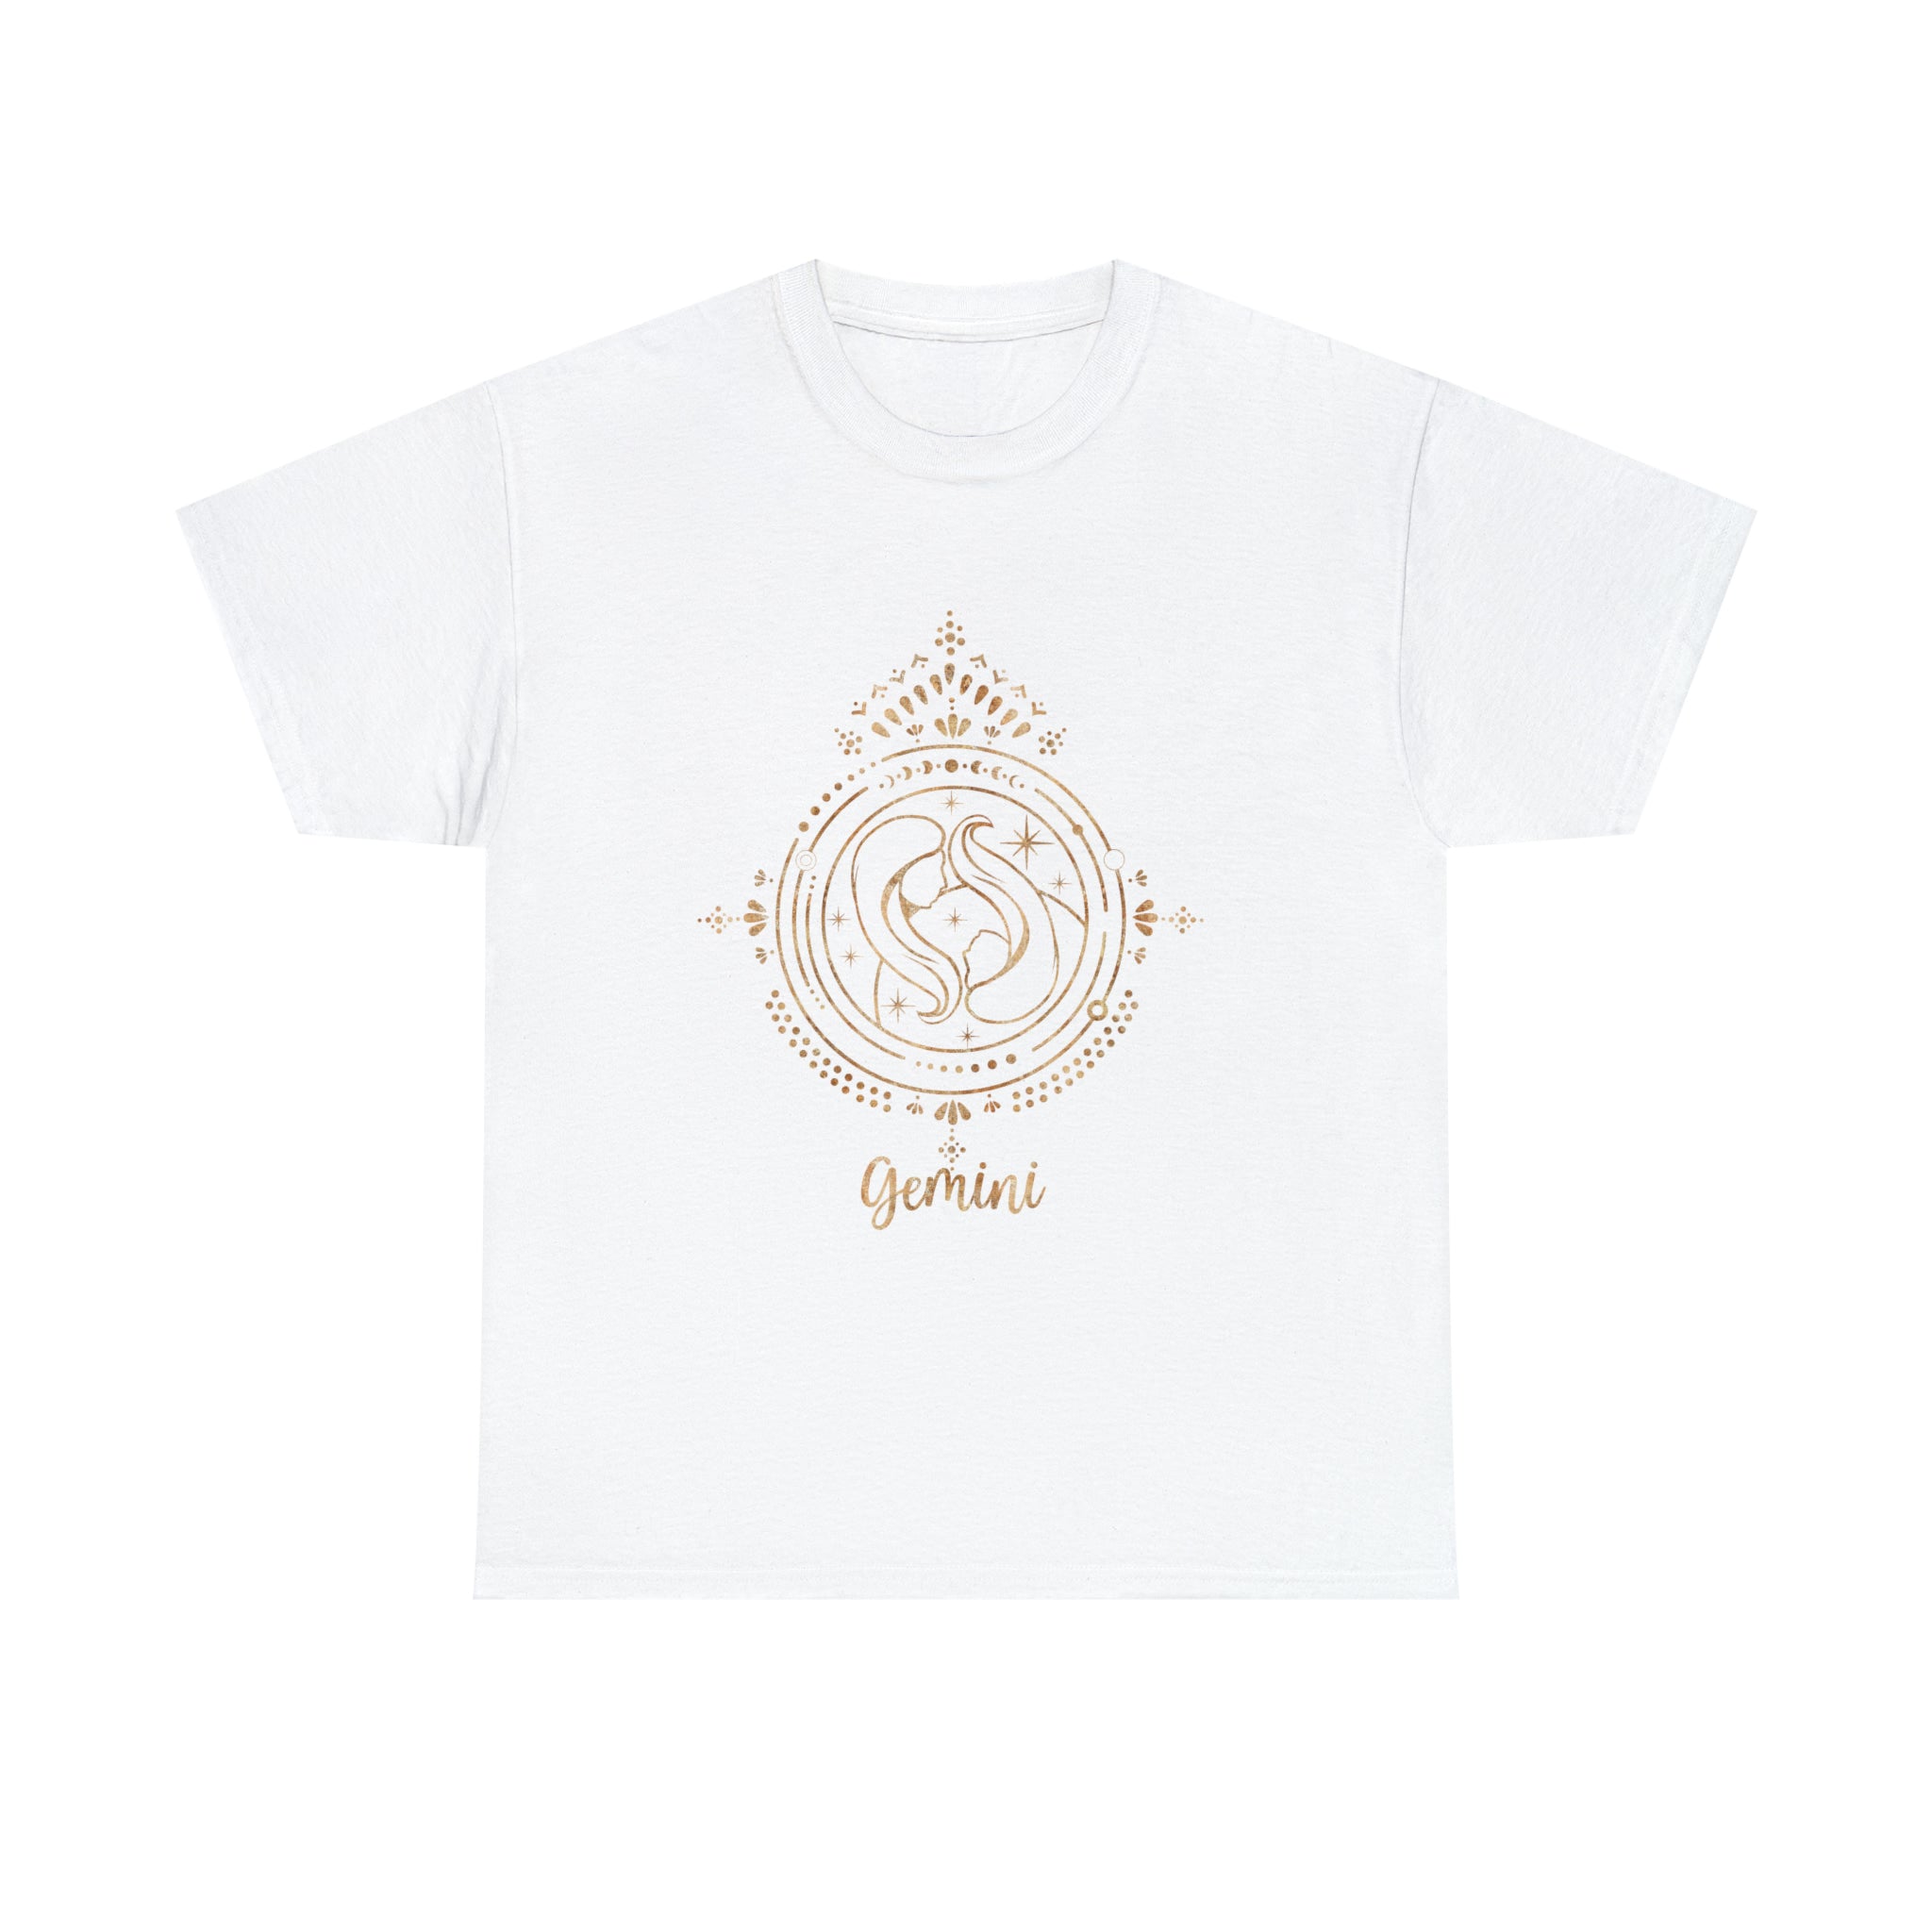 A Gemini T-Shirt featuring a logo, perfect for the intellectual individual.